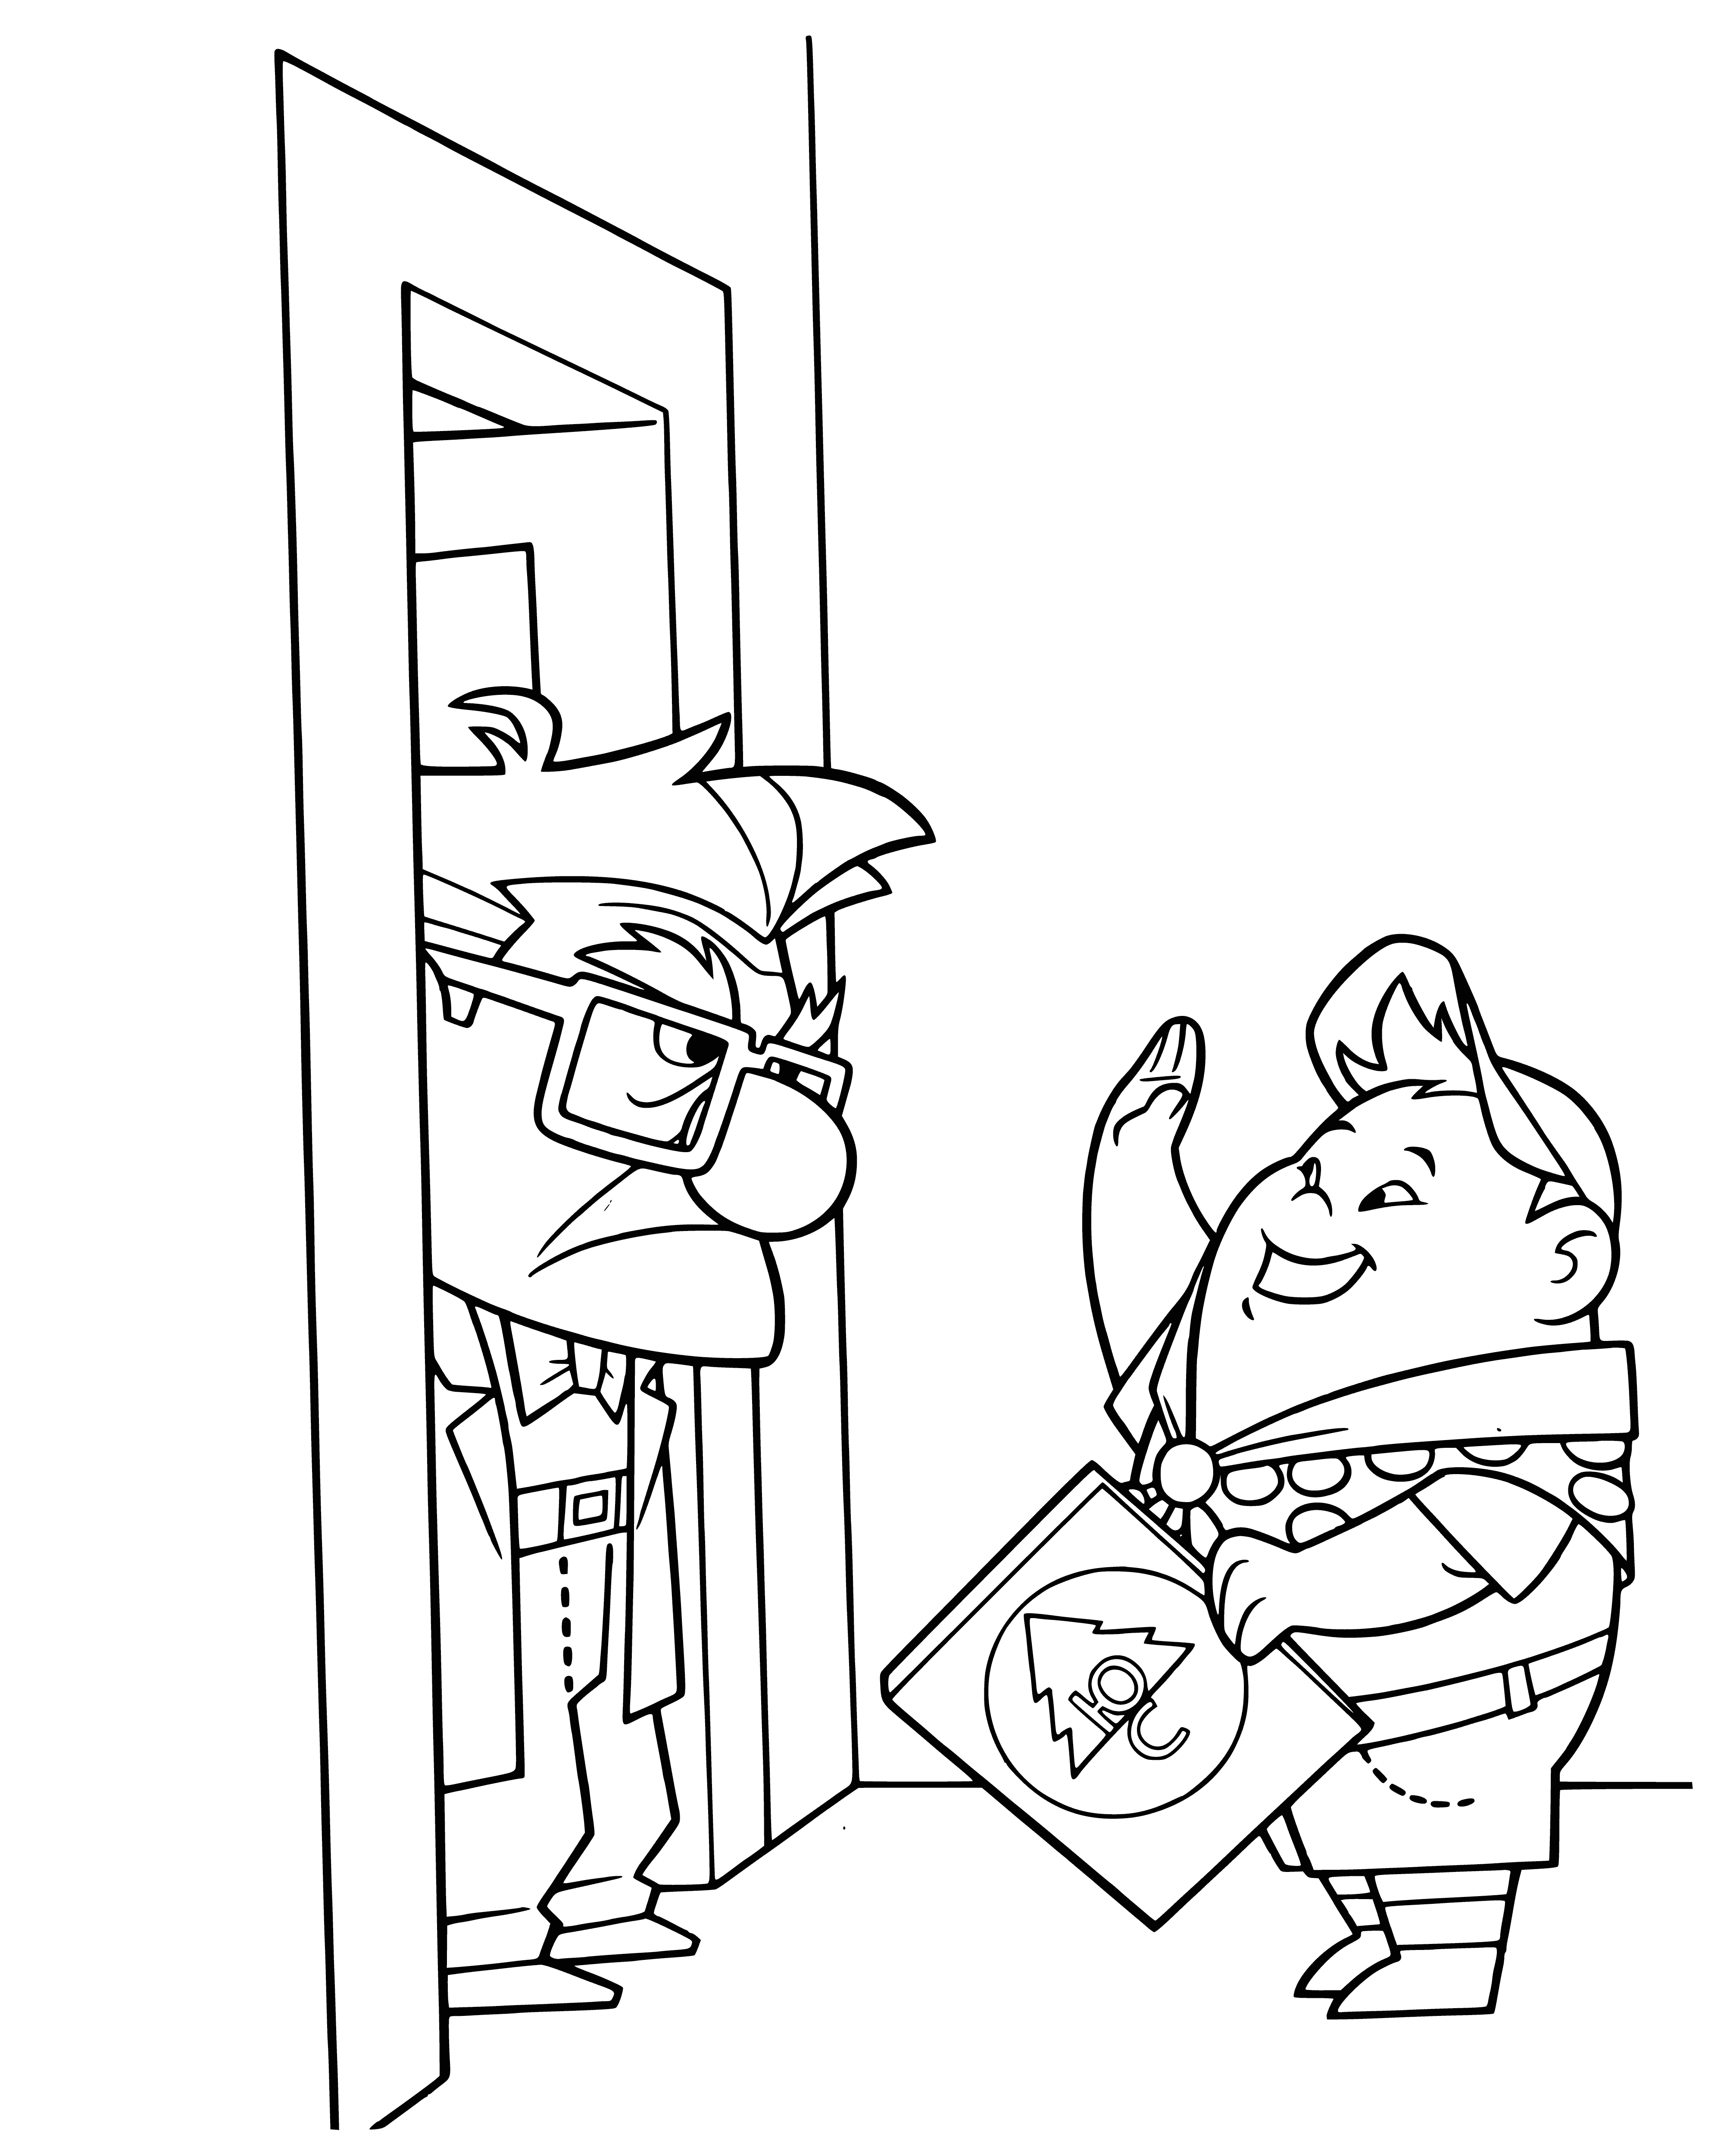 coloring page: Russell is a happy young boy with short dark hair, a red shirt, & blue jeans.